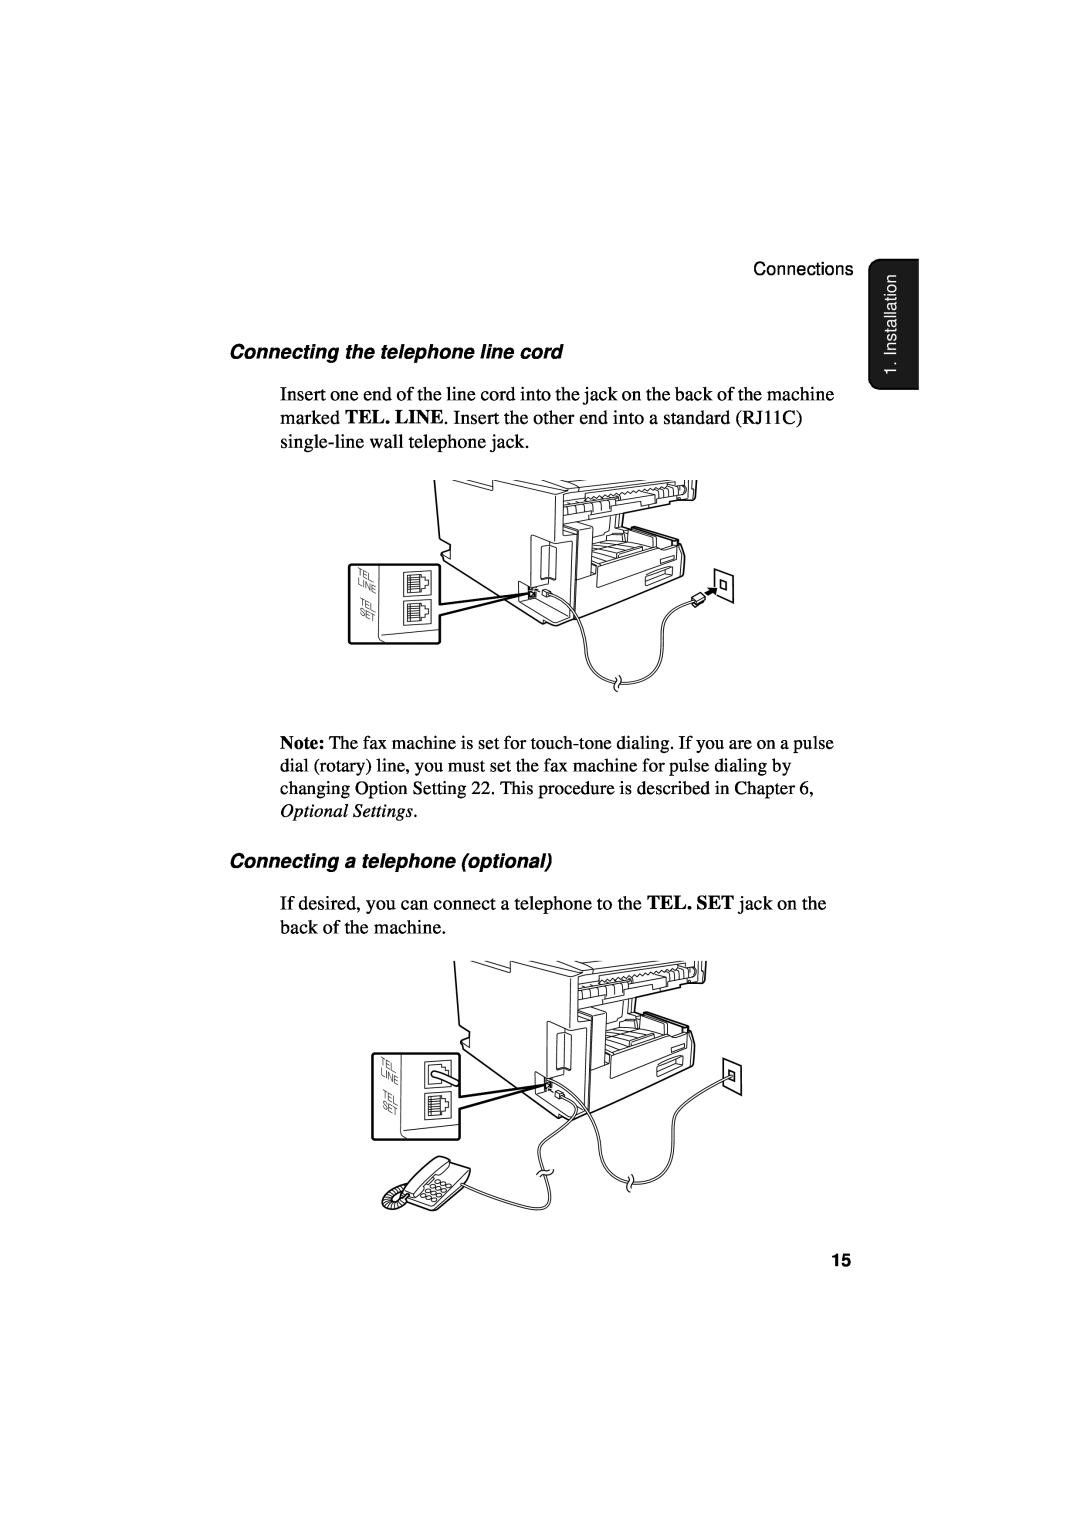 Sharp FO-5550, FO-5700, FO-4700 operation manual Connecting the telephone line cord, Connecting a telephone optional 